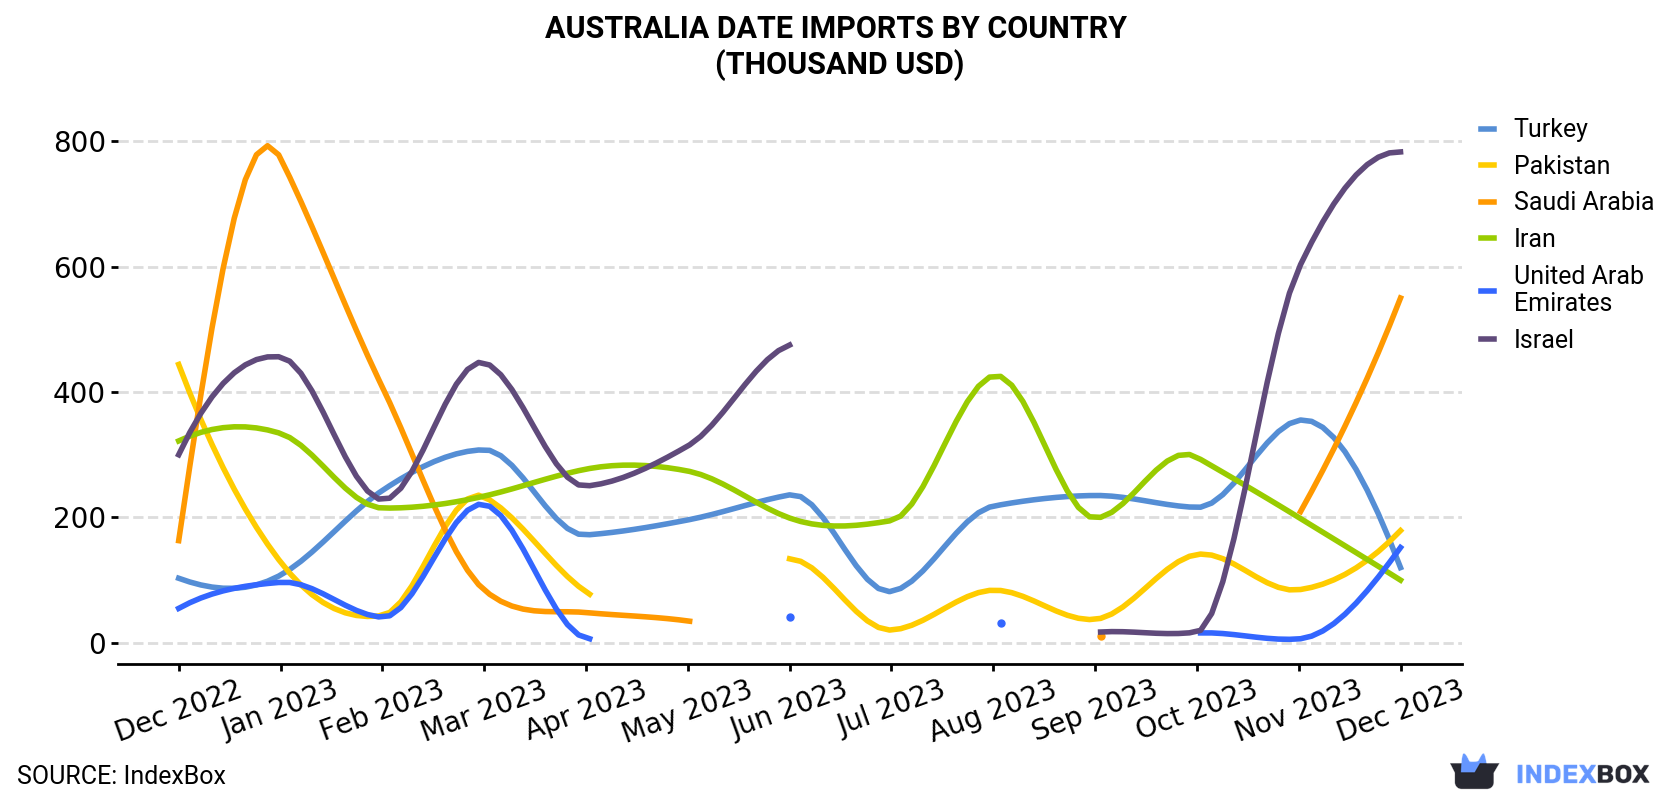 Australia Date Imports By Country (Thousand USD)